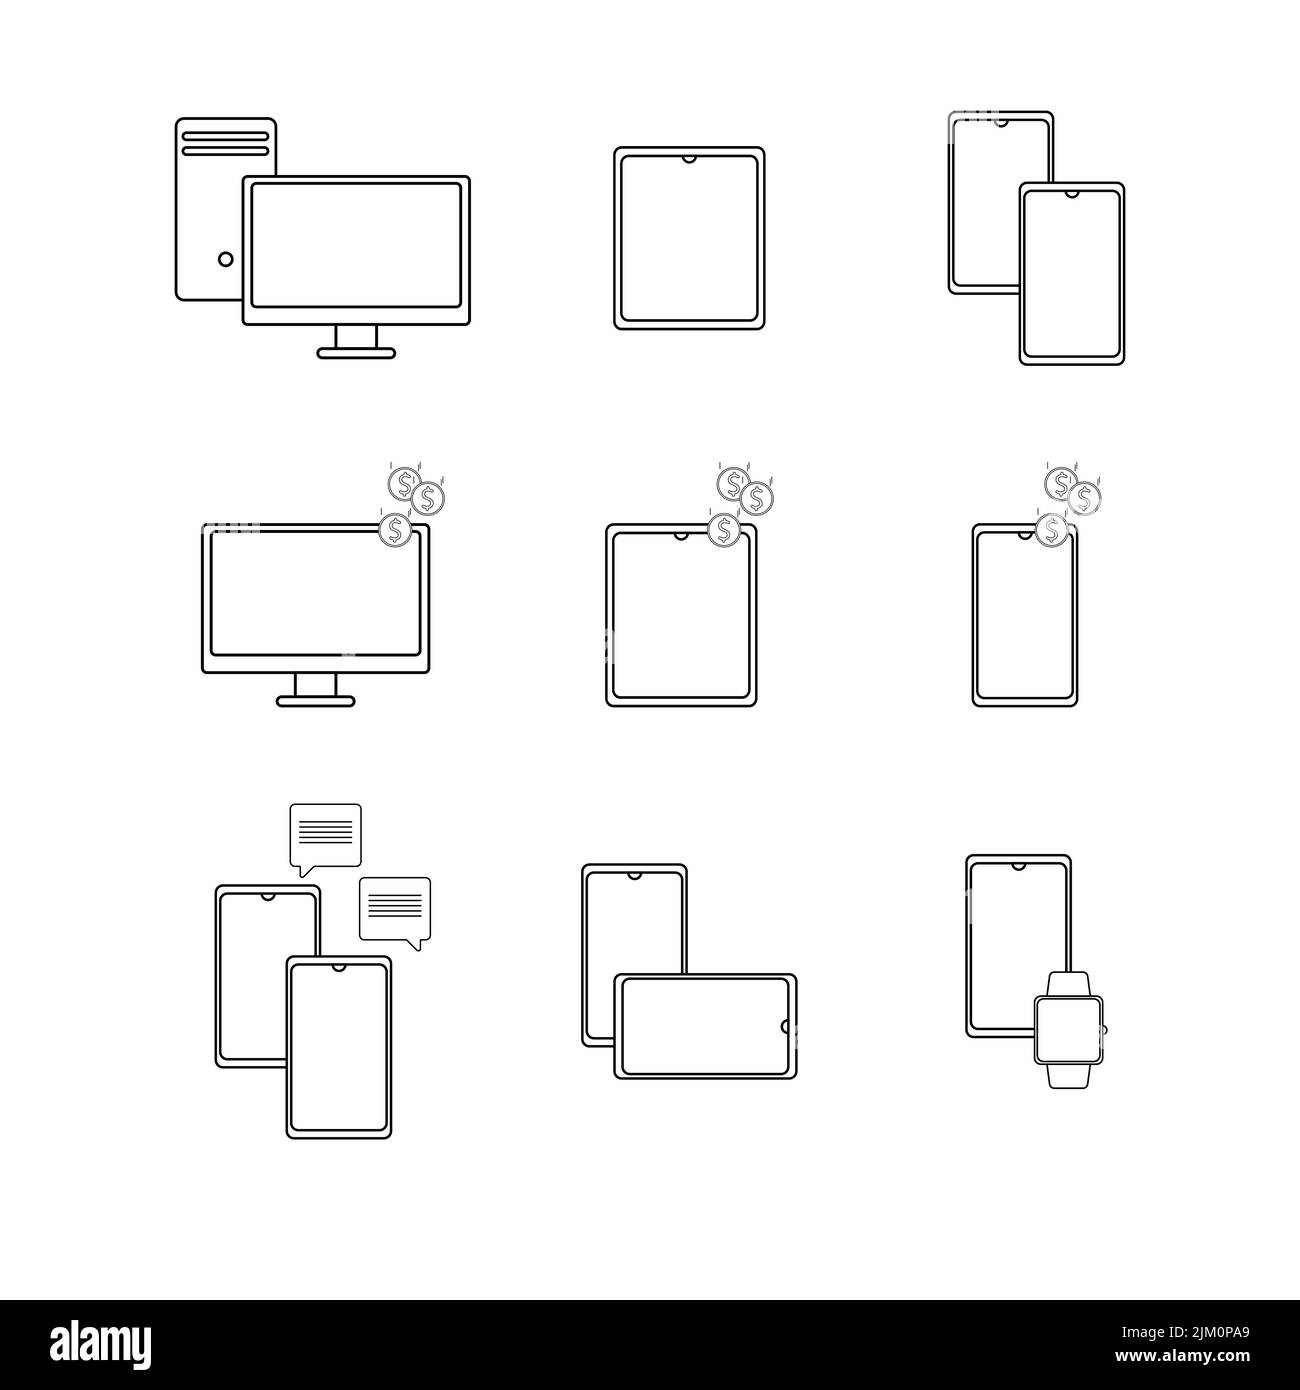 Thin line icons set of devices. Stock Vector